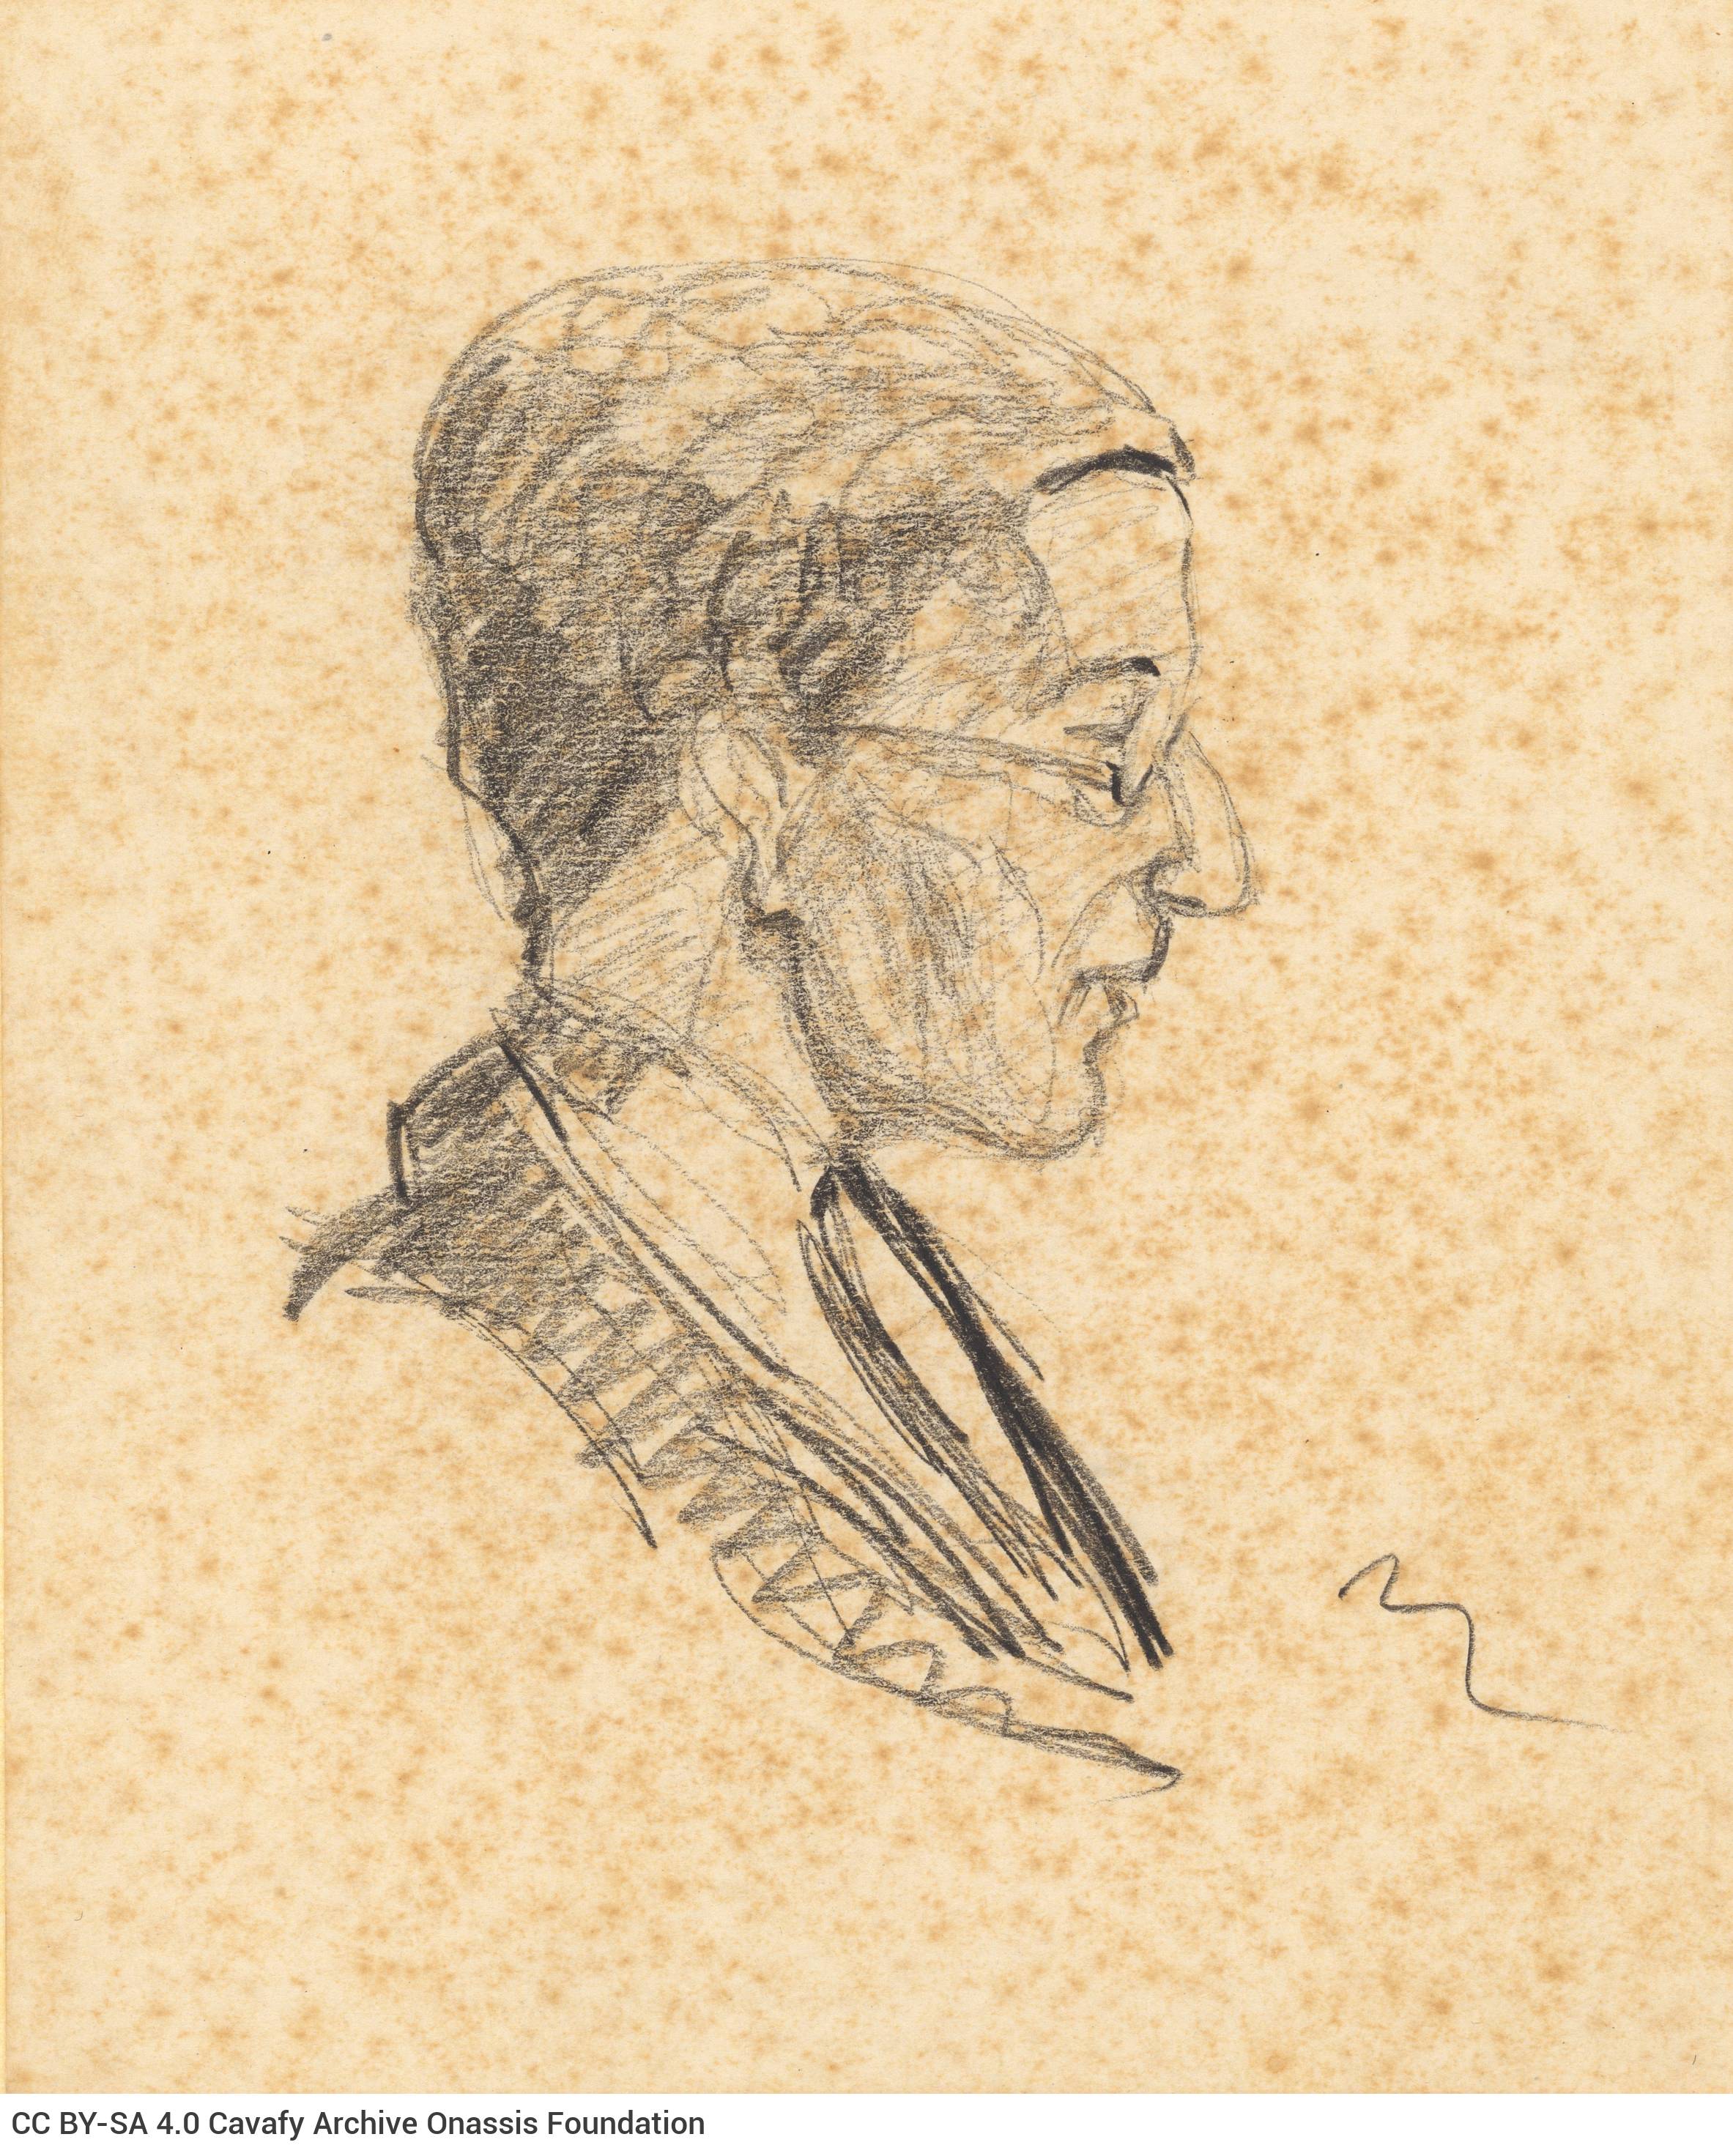 Sketch by an unknown person on one side of a sheet. Blank verso. It depicts Cavafy in profile view, wearing glasses and looki